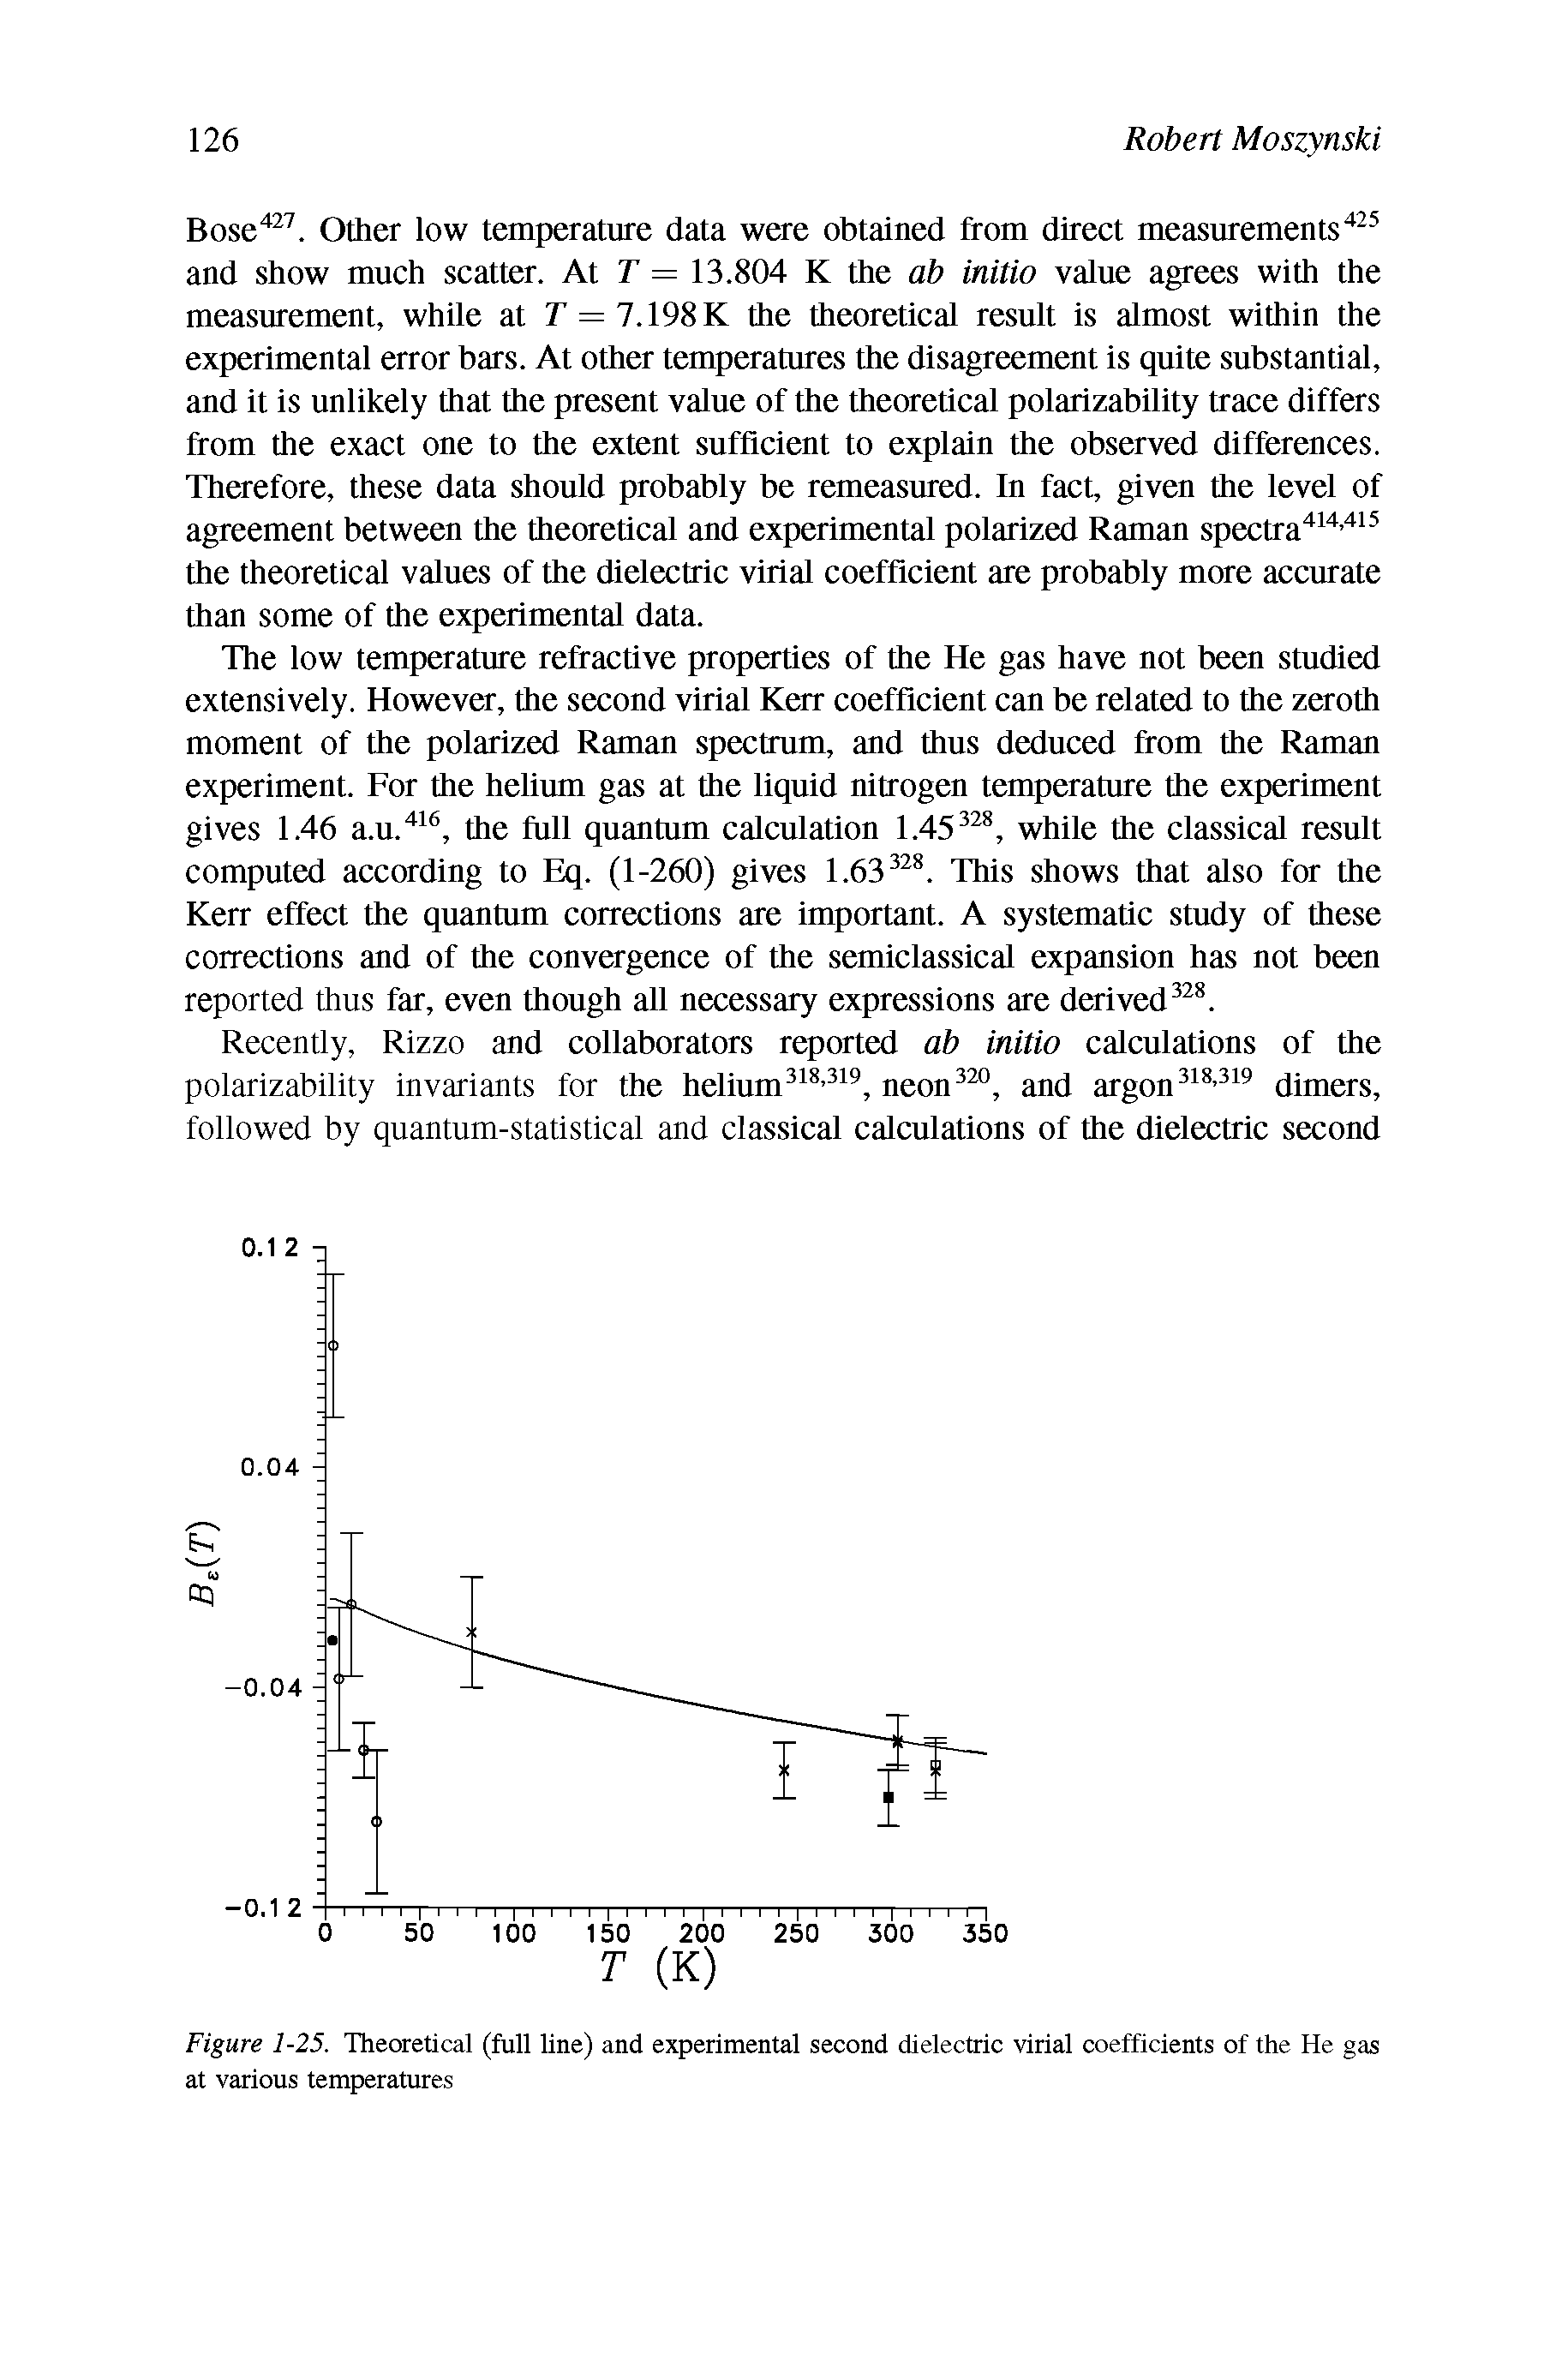 Figure 1-25. Theoretical (full line) and experimental second dielectric virial coefficients of the He gas at various temperatures...